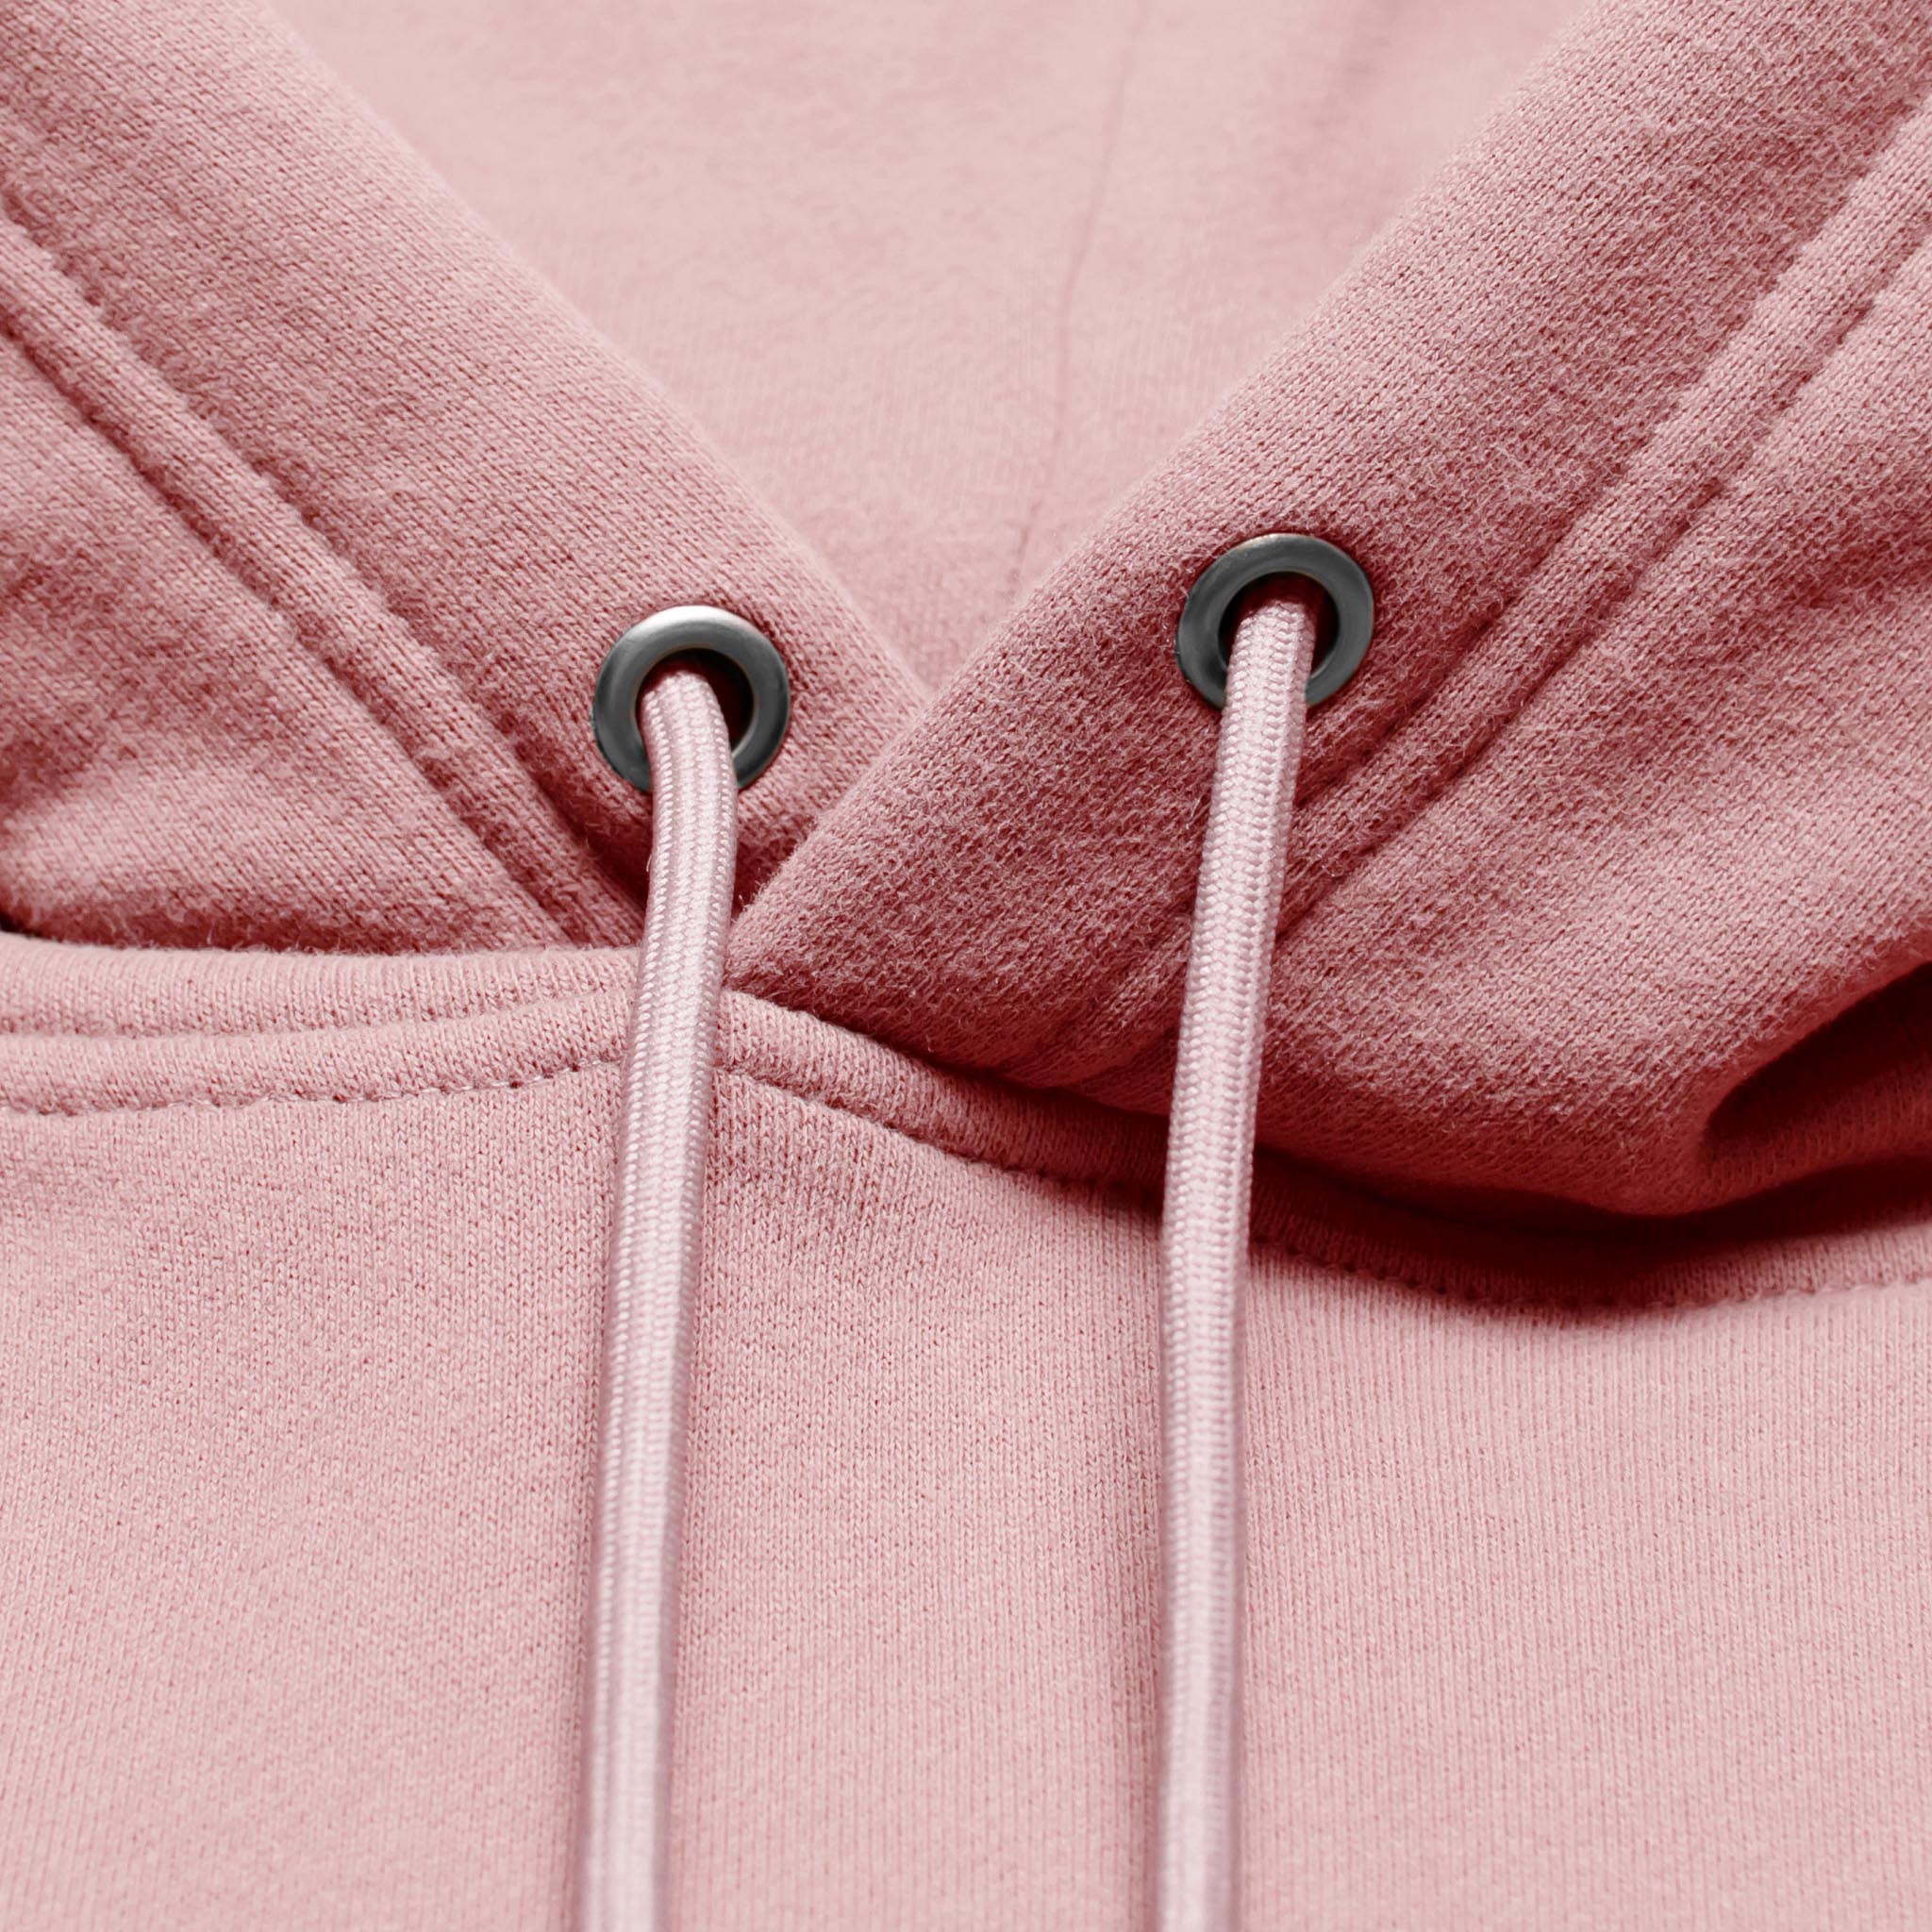 HOMME+ ESSENTIAL By Homme Hoodie Blush